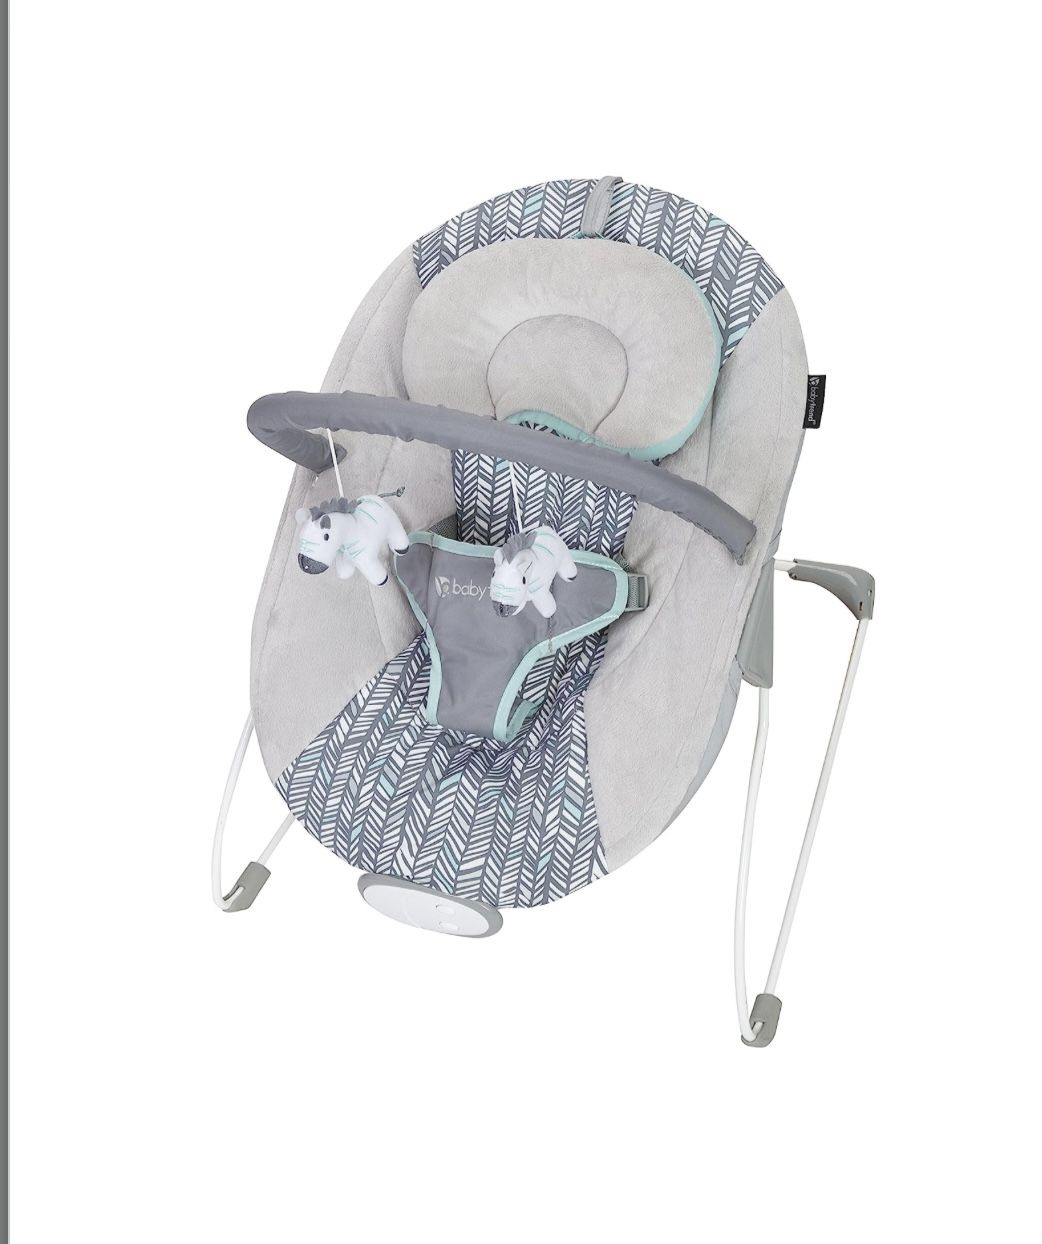 New In Box - Baby Trend EZ Bouncer - Zingy Print